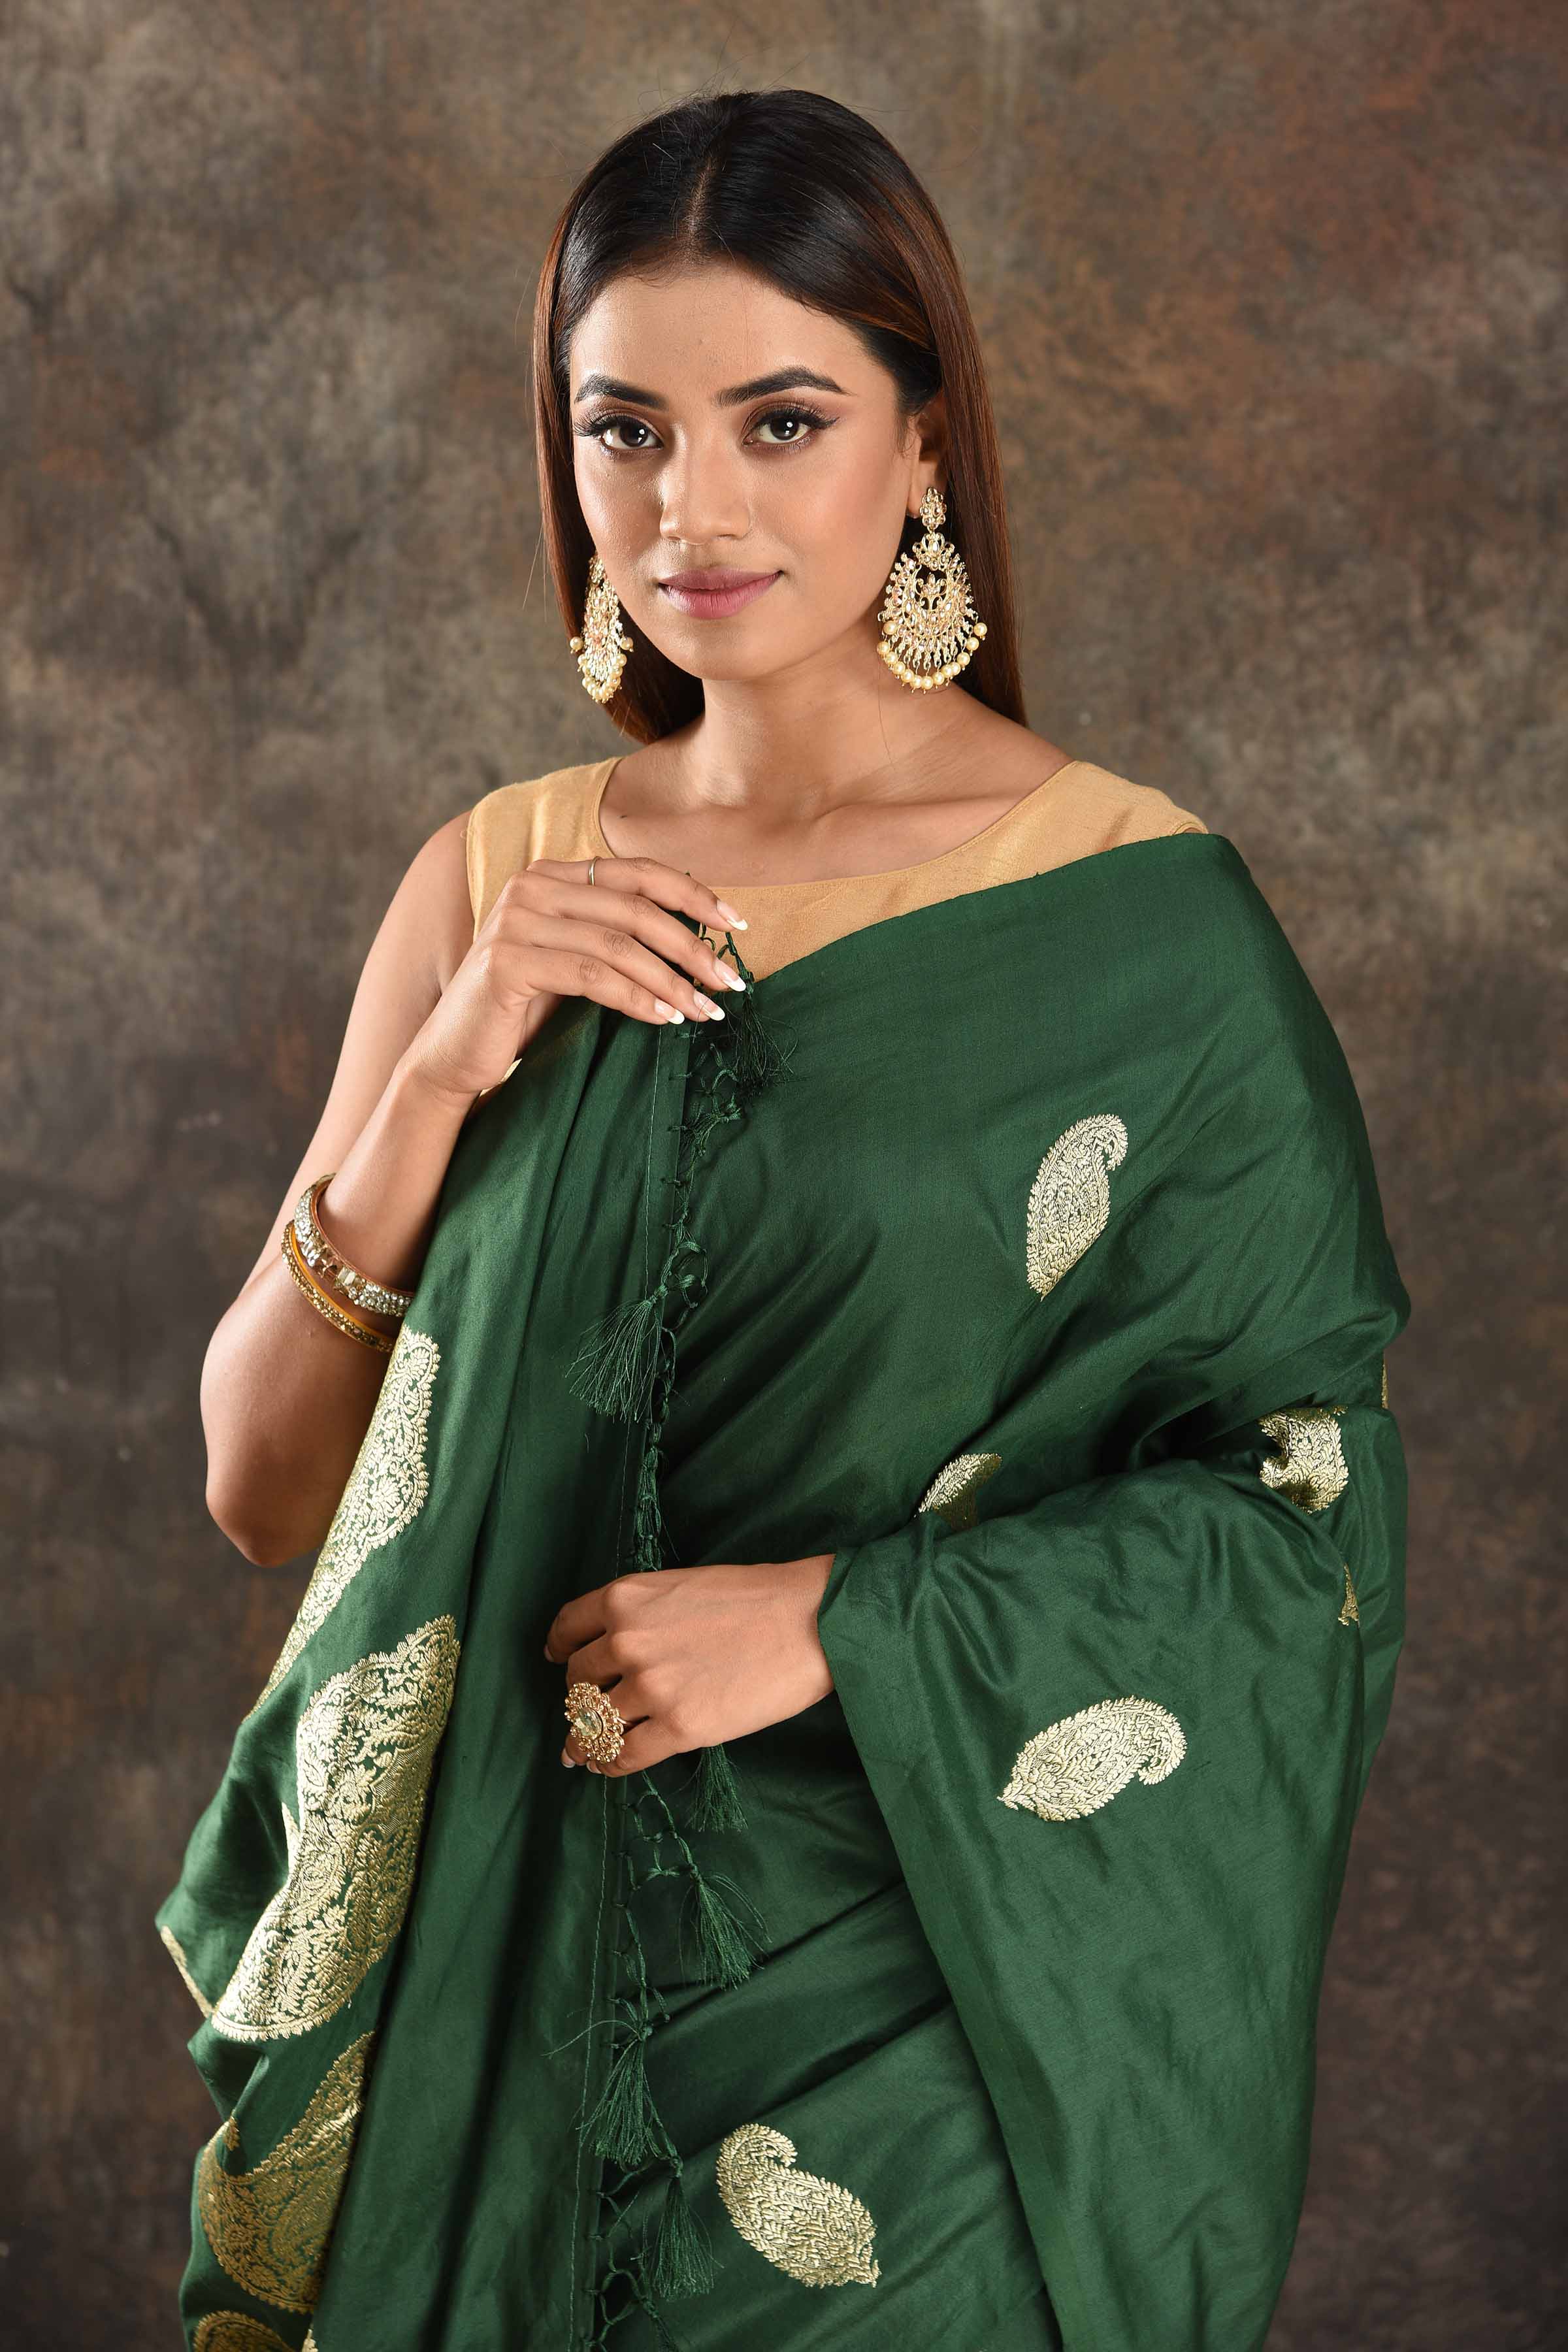 Buy stunning dark green silk saree online in USA with silver zari paisley buta. Be vision of elegance on special occasions in exquisite designer sarees, handwoven sarees, georgette sarees, embroidered sarees, Banarasi sarees from Pure Elegance Indian saree store in USA.-closeup